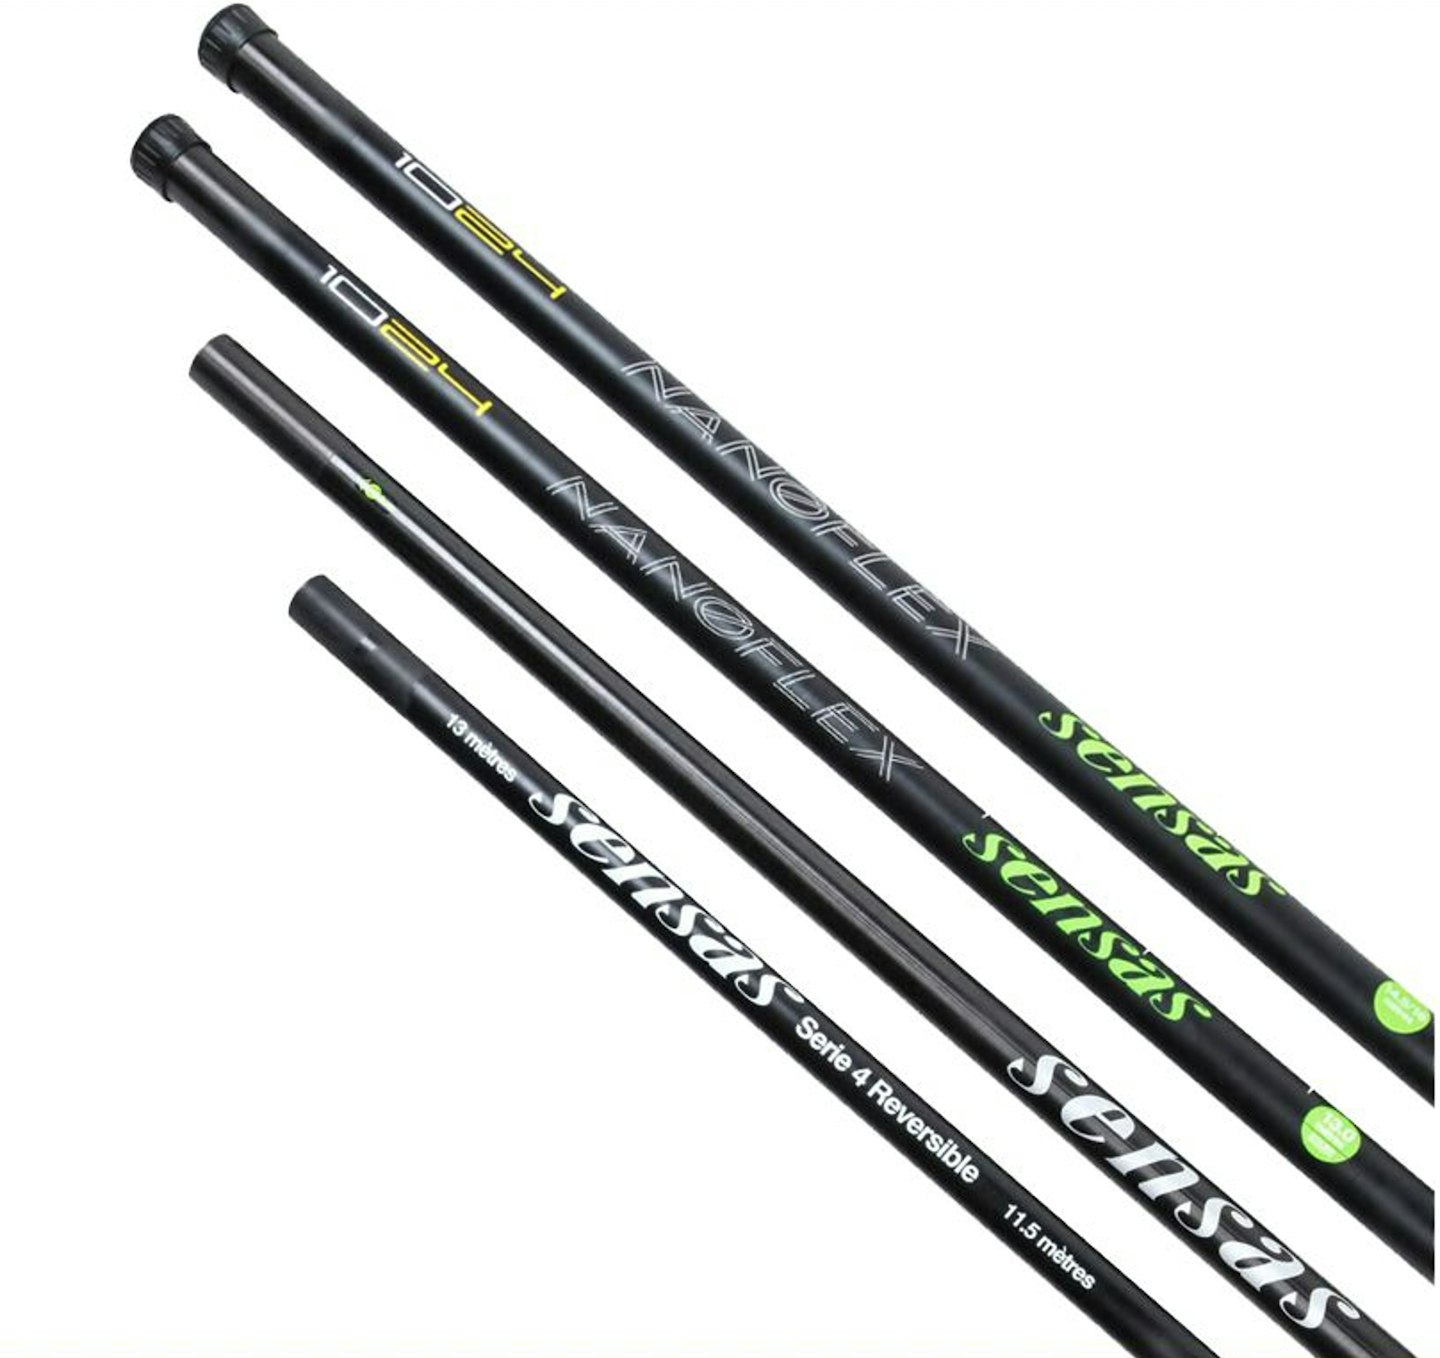 The best mid-priced all-rounder poles